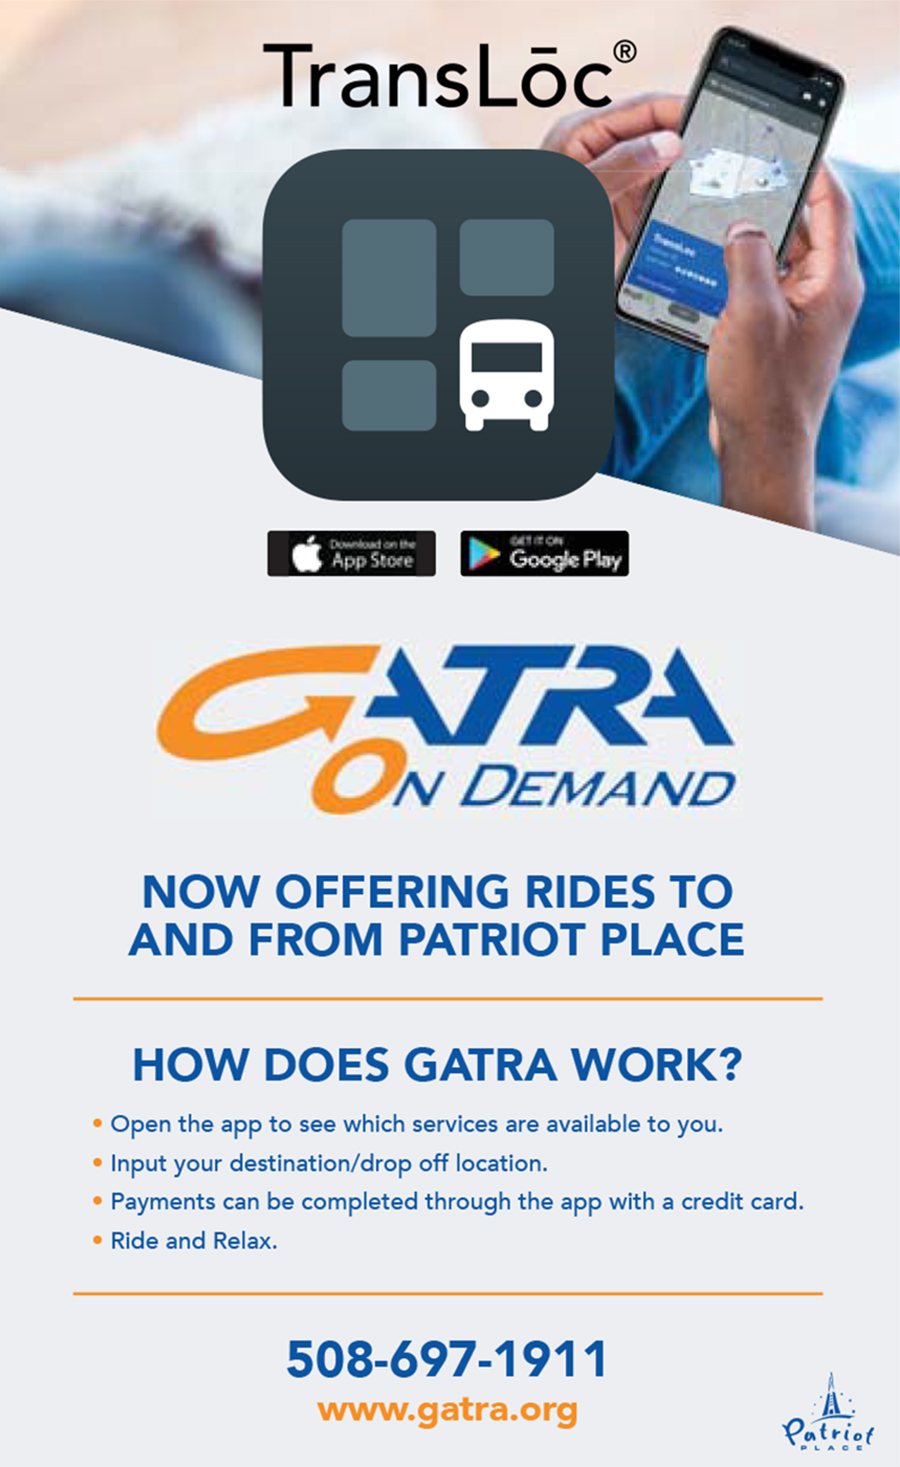 GATRA On Demand - Now Offering Rides To and From Patriot Place. Click for more details.